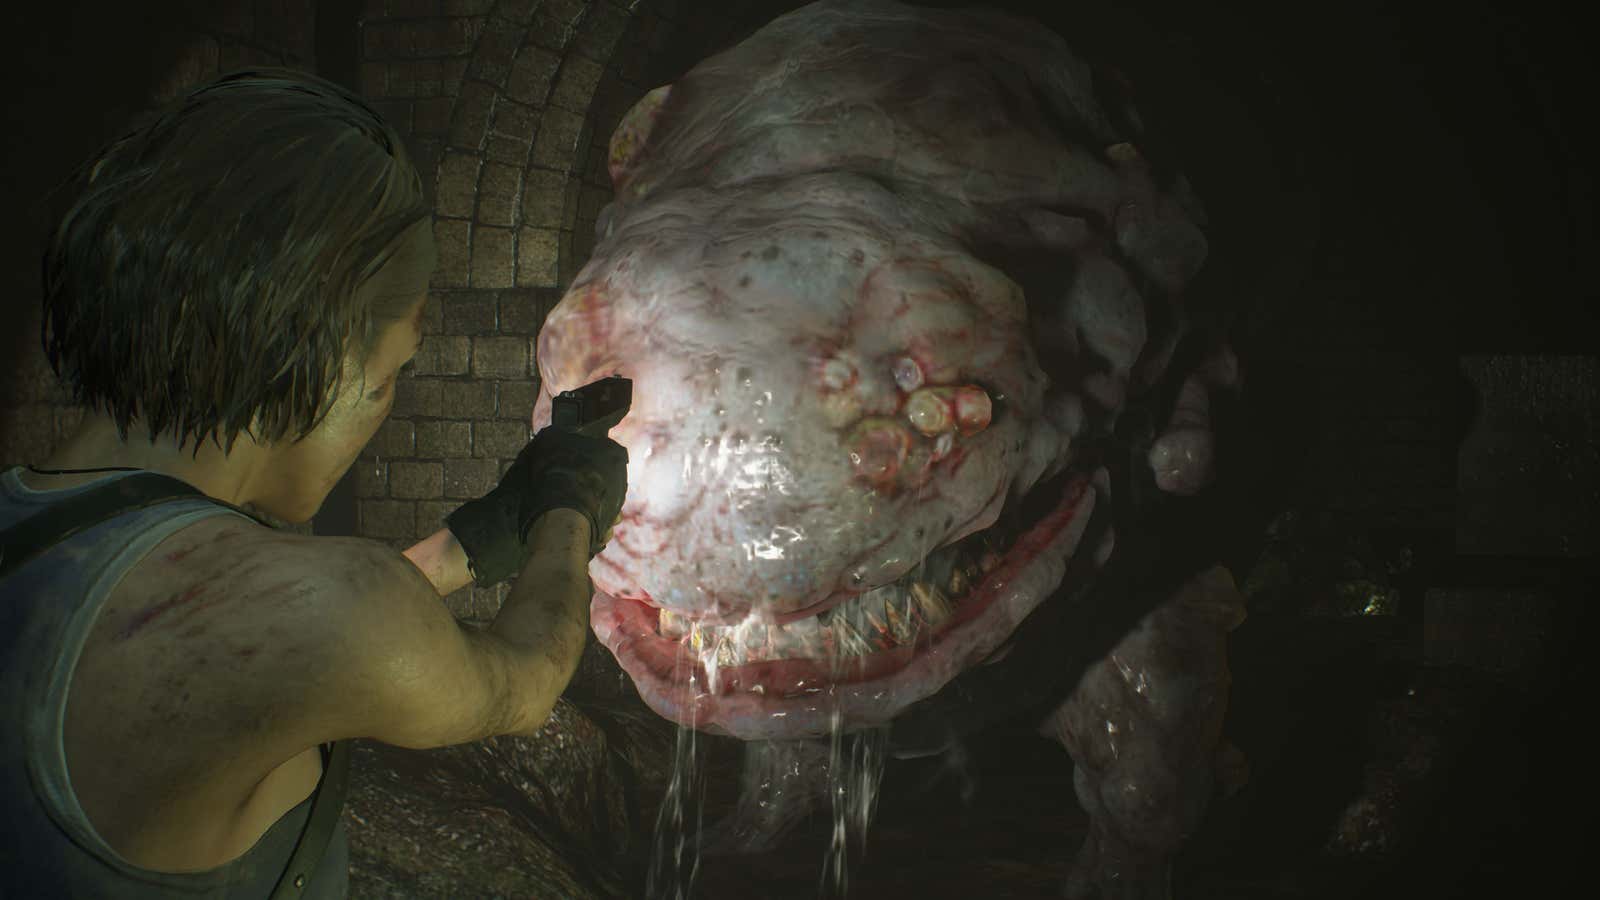 Resident Evil 3' remake delivers thrills, chills and lots of zombies